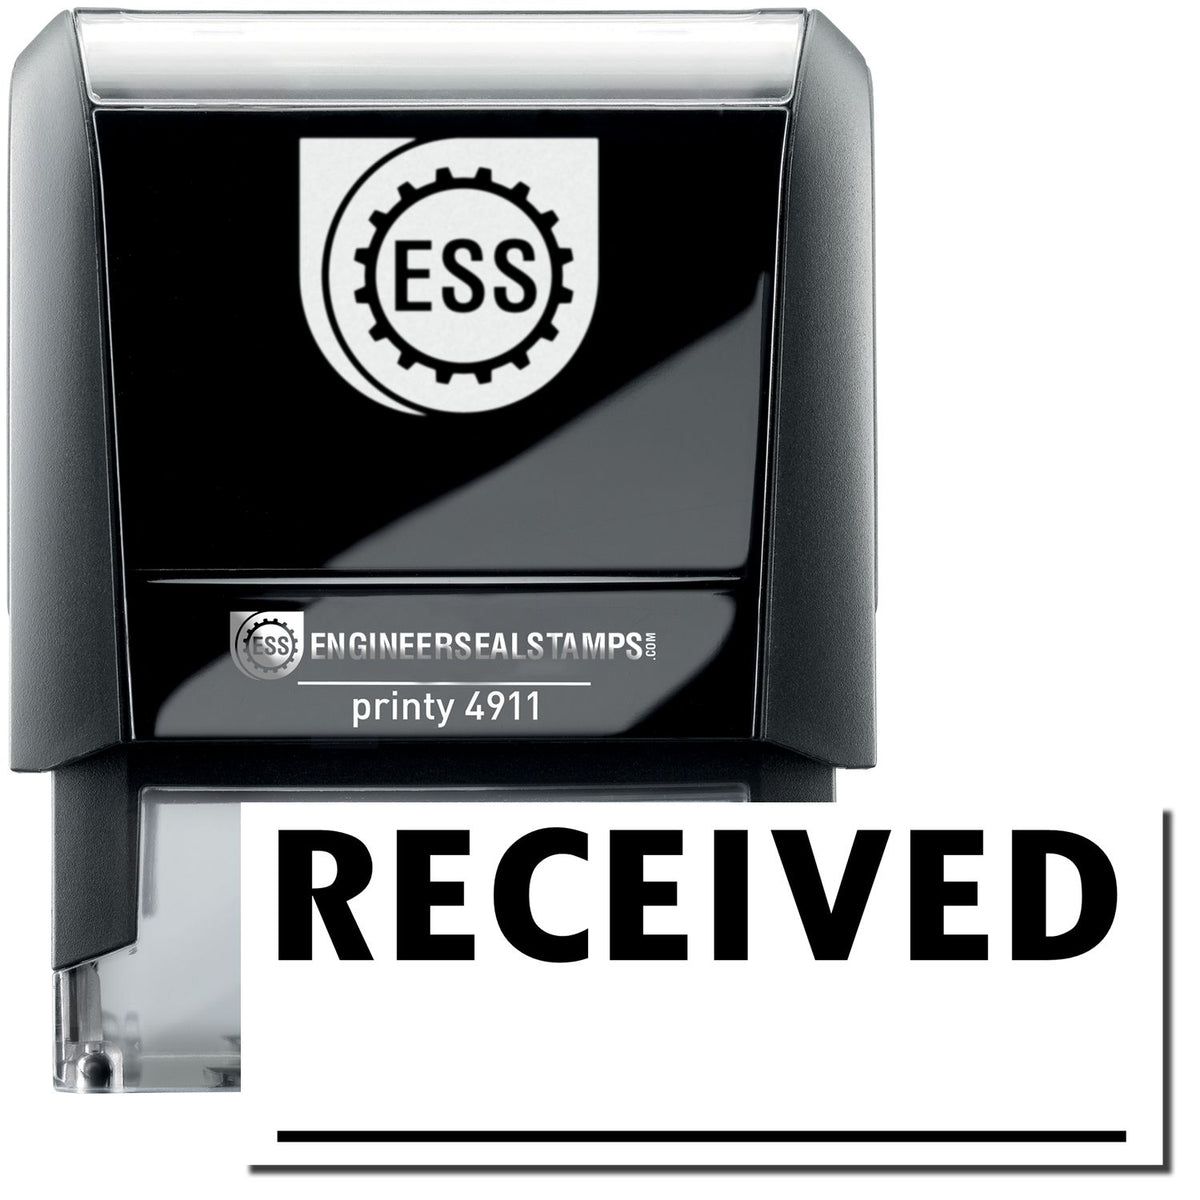 A self-inking stamp with a stamped image showing how the text &quot;RECEIVED&quot; with a line under it is displayed after stamping.